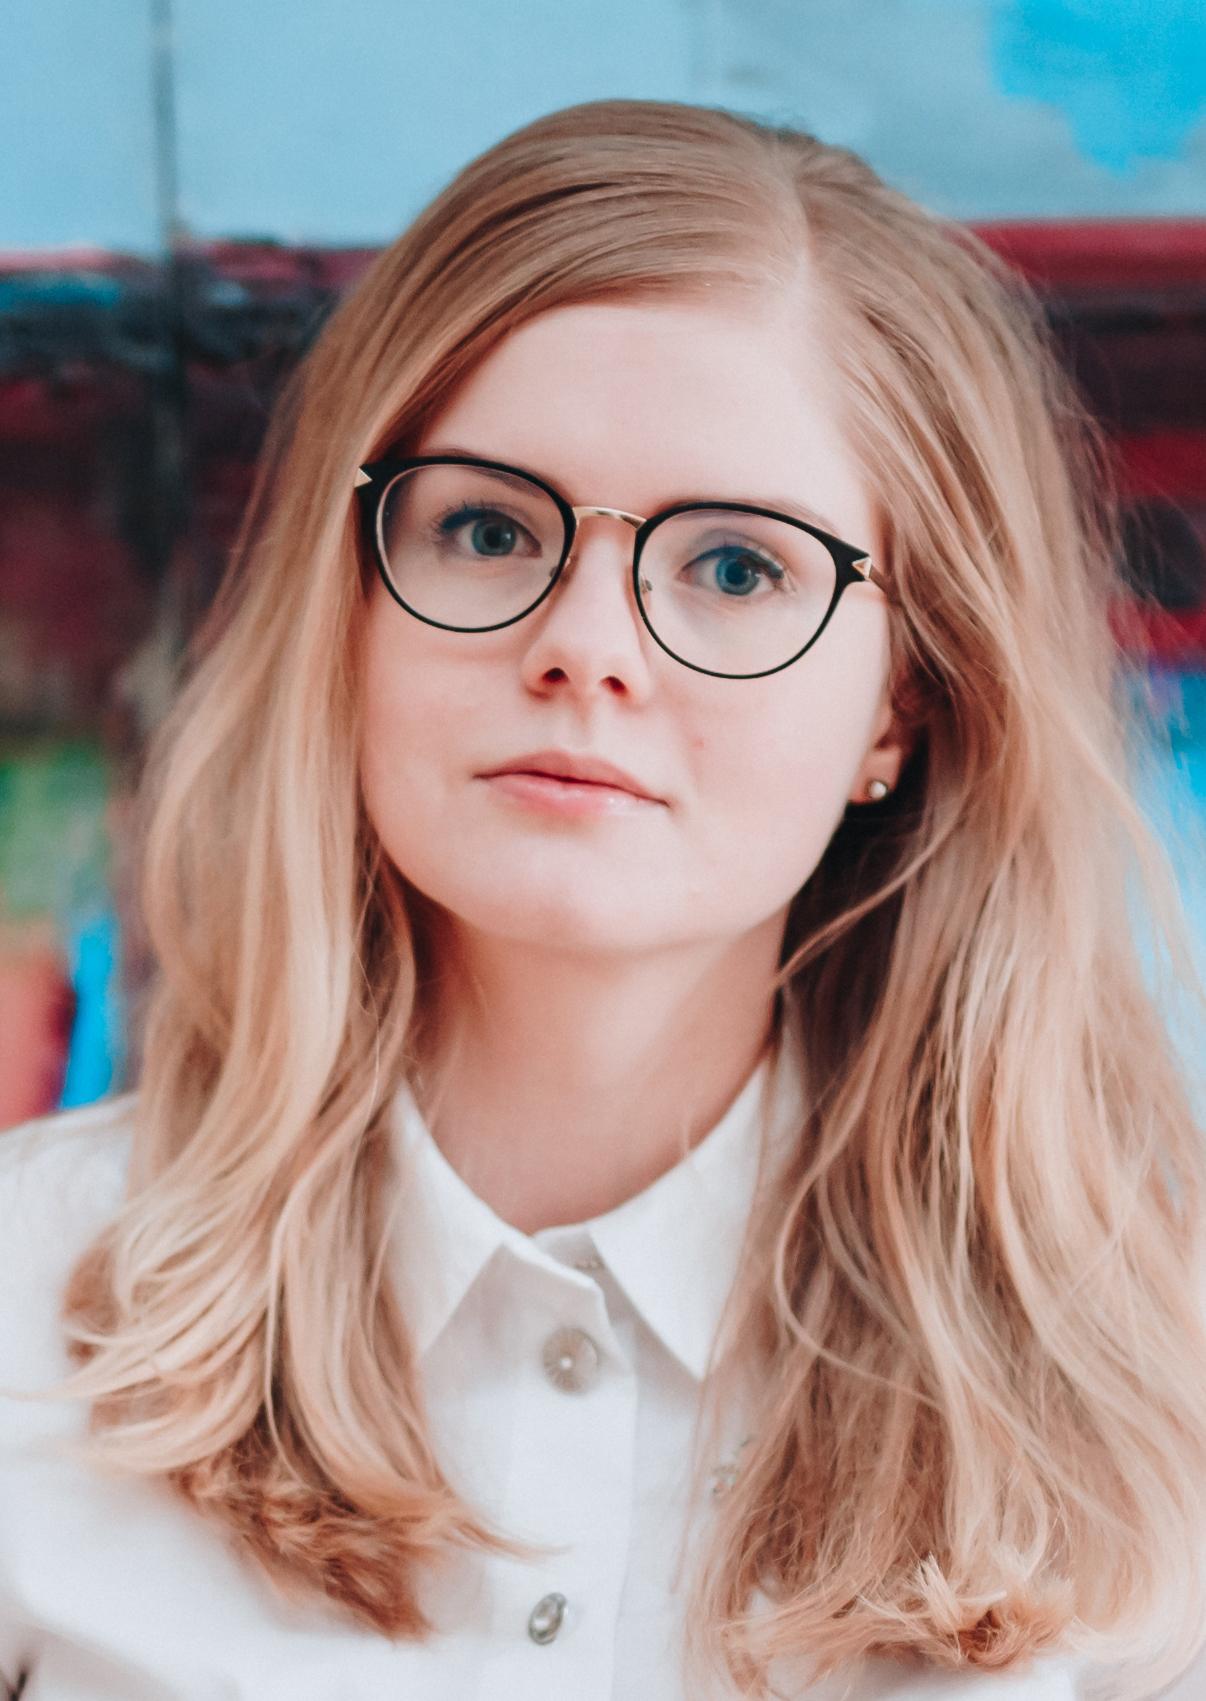 Joanna Hoffmann, a white-skinned person with long blonde hair and black eyeglasses. Joanna is wearing a white shirt with buttons. Framed from chest up, Joanna is standing in front of a blue and red backdrop.